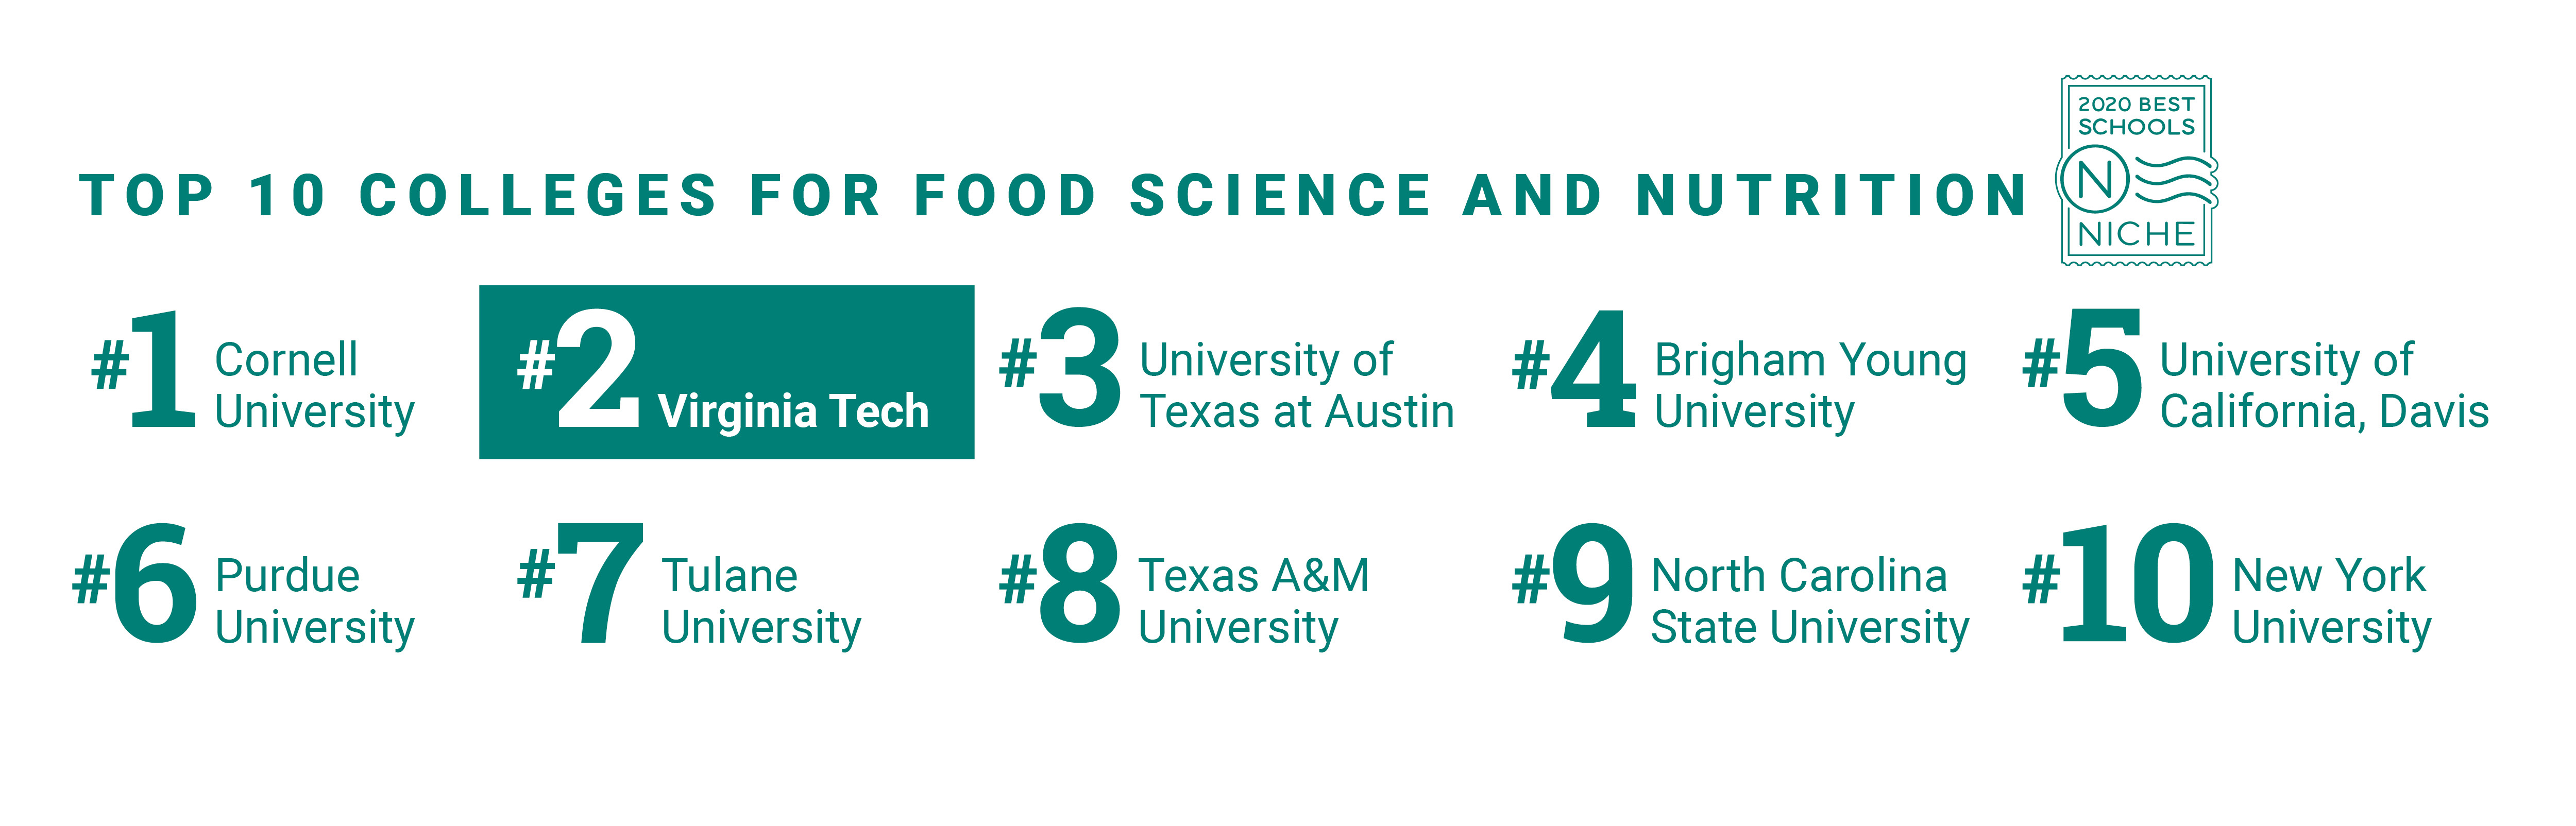 Top 10 Colleges for Food Science and Nutrition